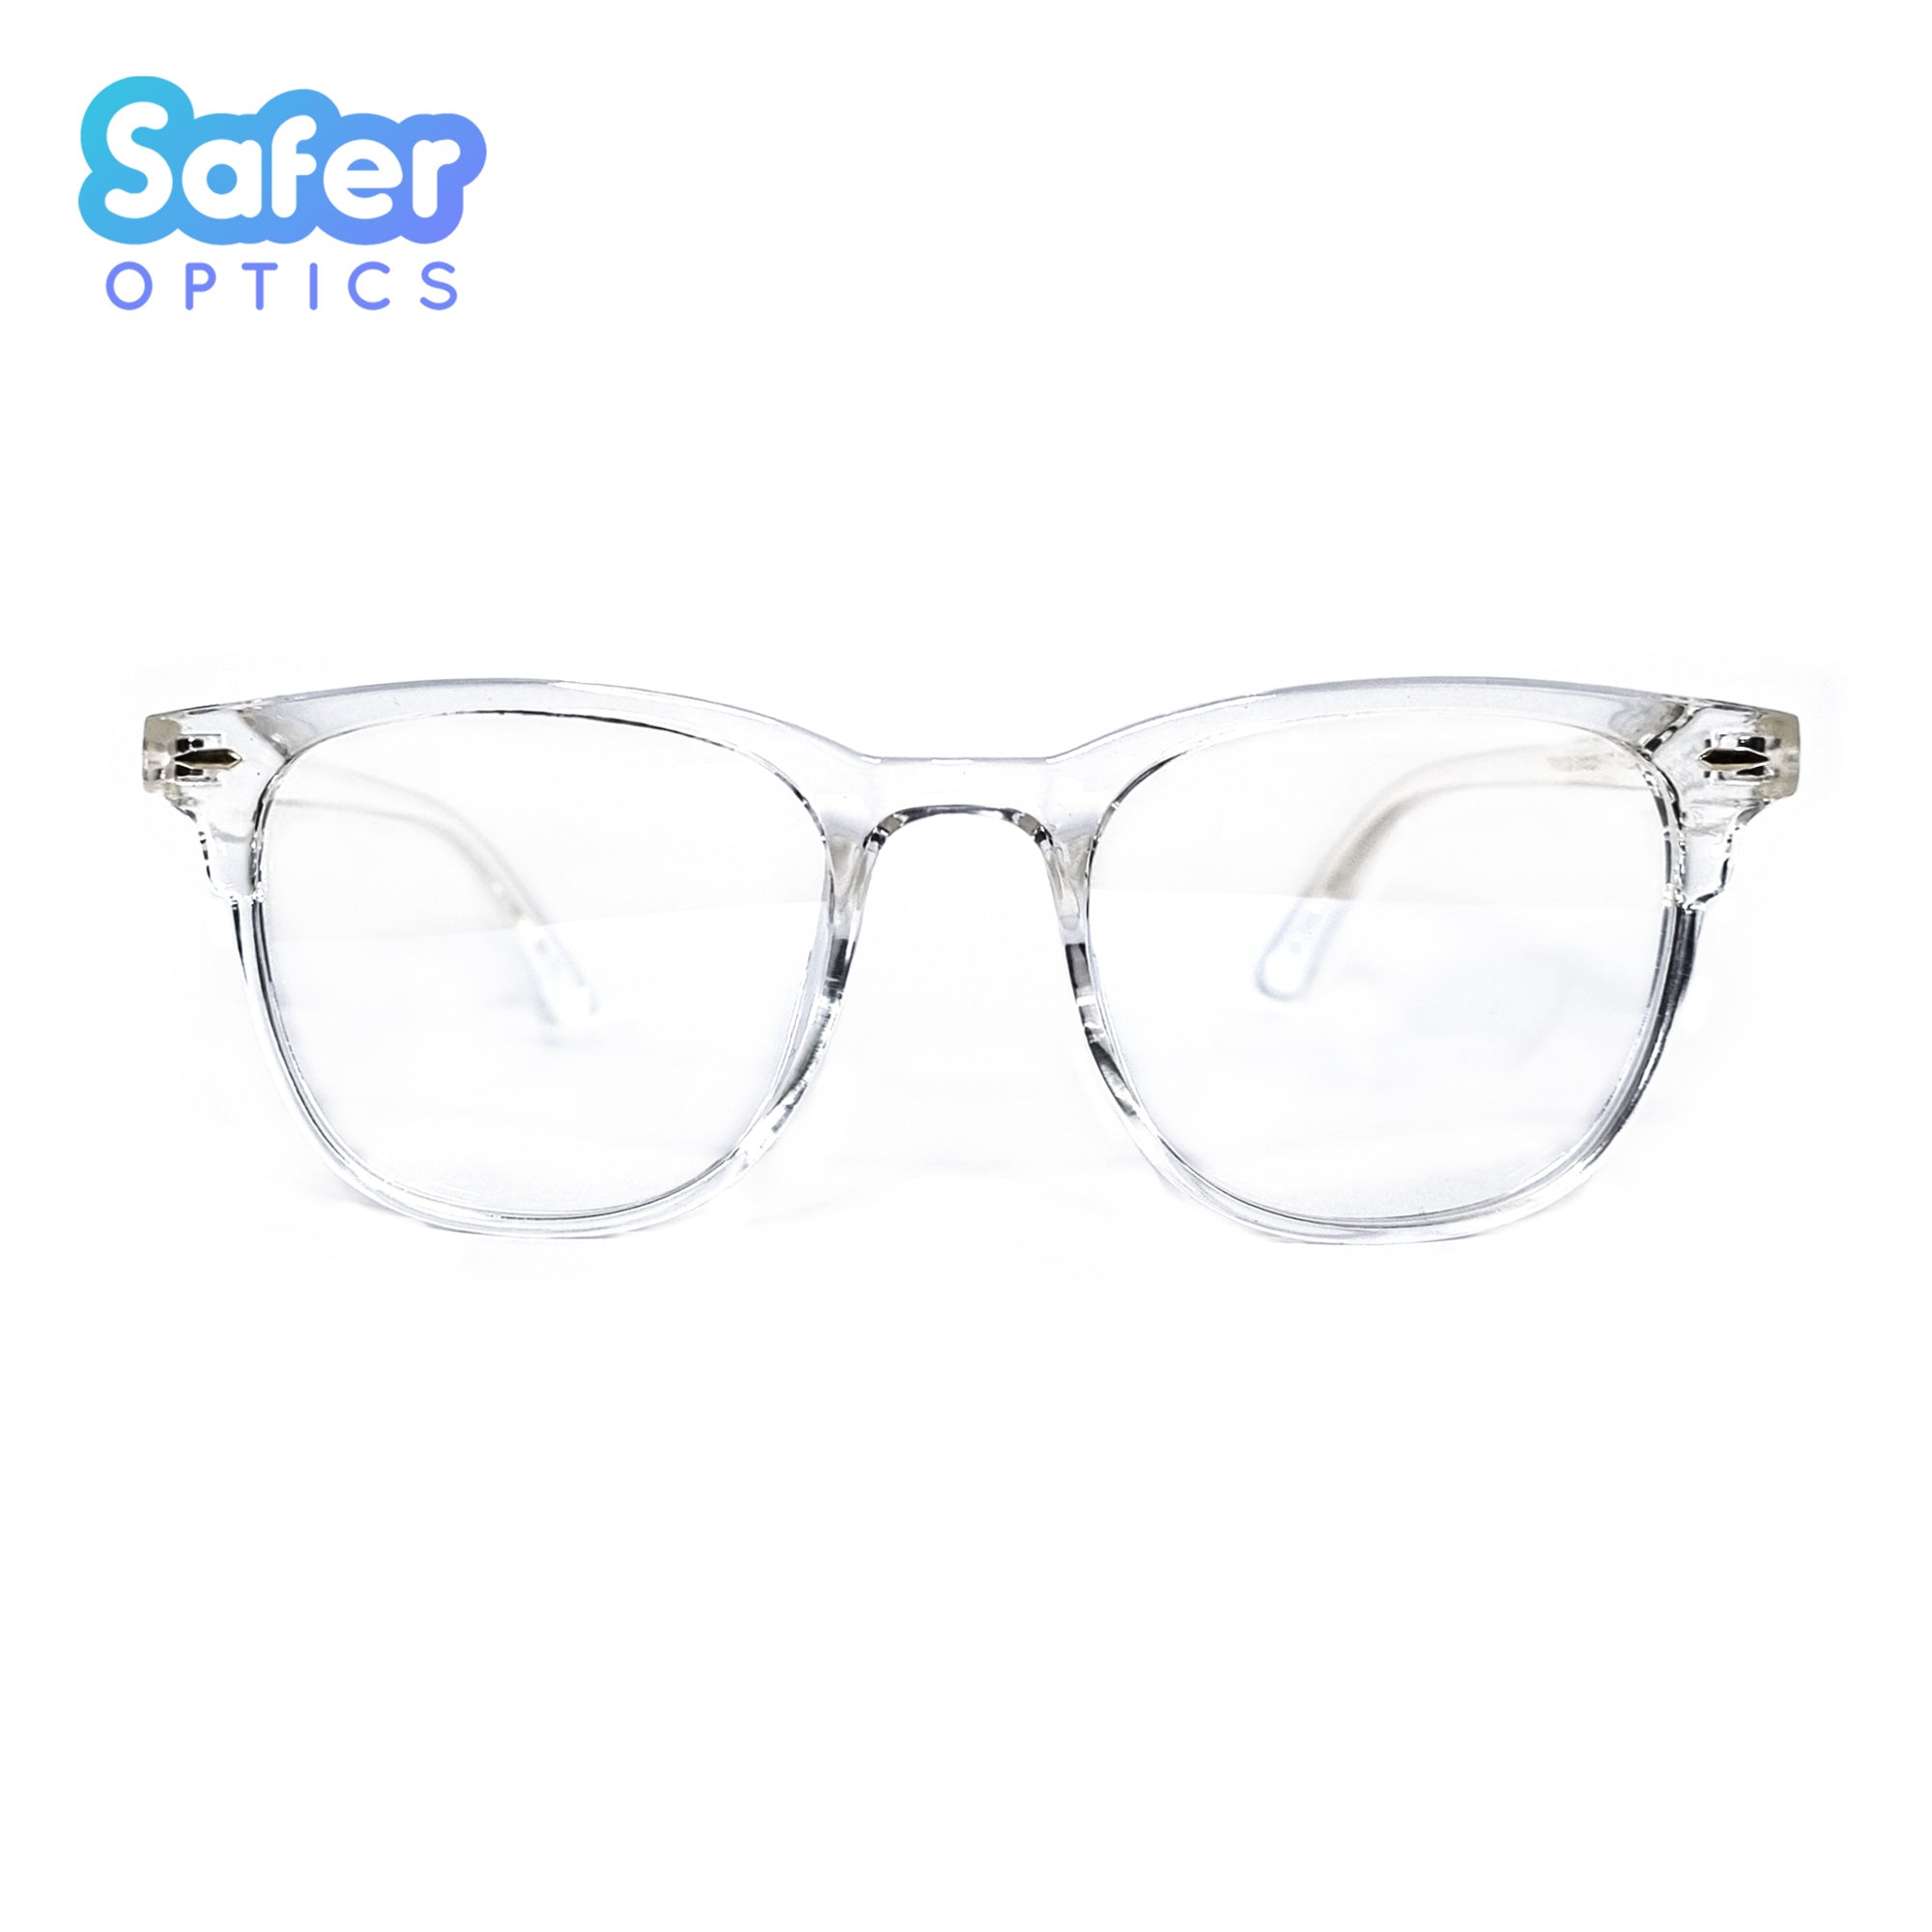 Pacific - Crystal Clear - SaferOptics Anti Blue Light Glasses Malaysia | Adult, Customize, Large, Lightweight, new, Pacific, Square, White